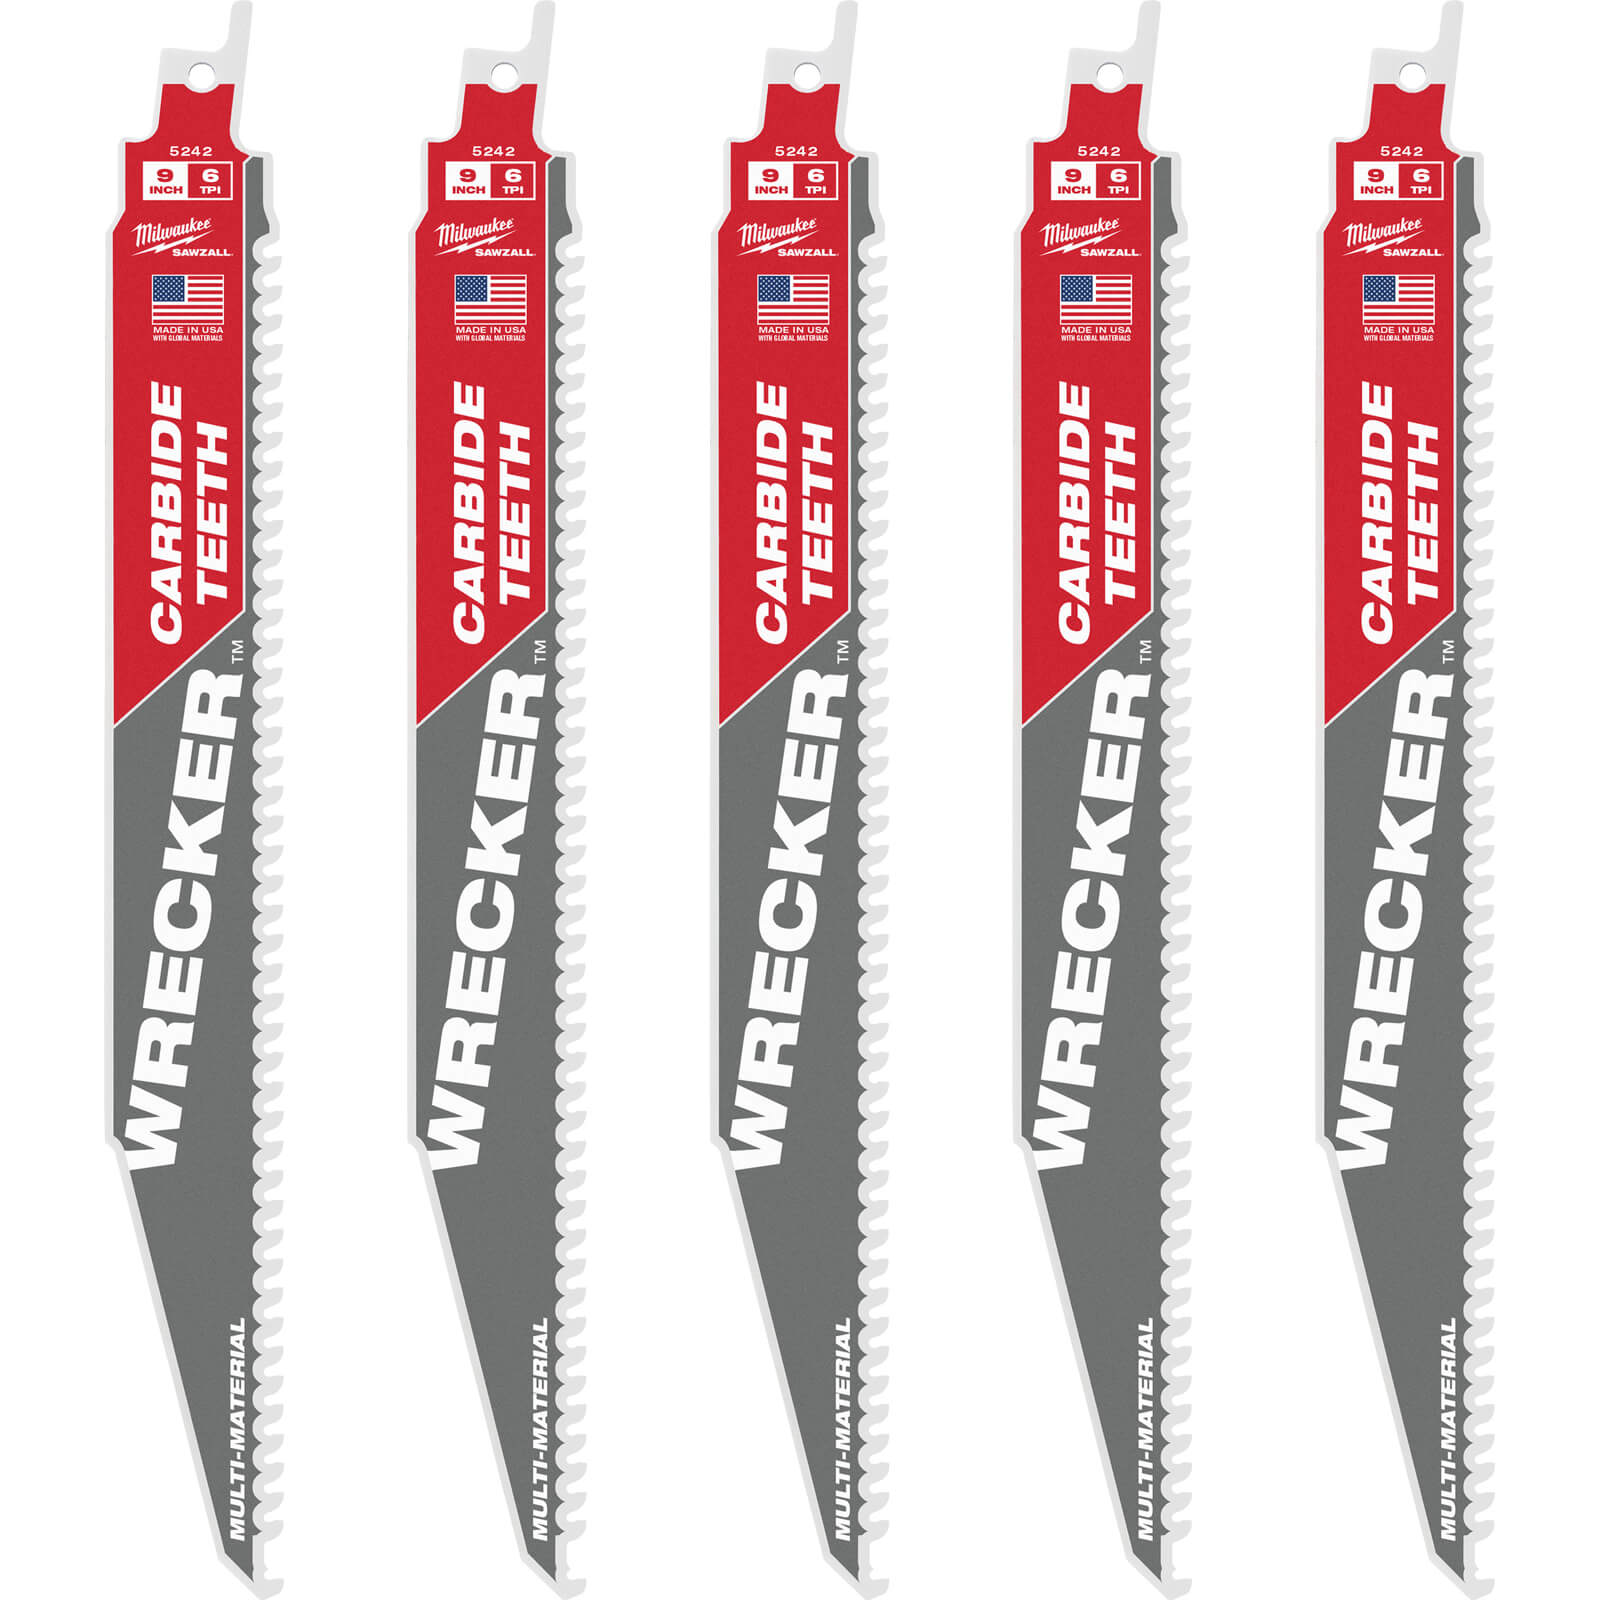 Image of Milwaukee Heavy Duty WRECKER Carbide Demolition Saw Blades 230mm Pack of 5